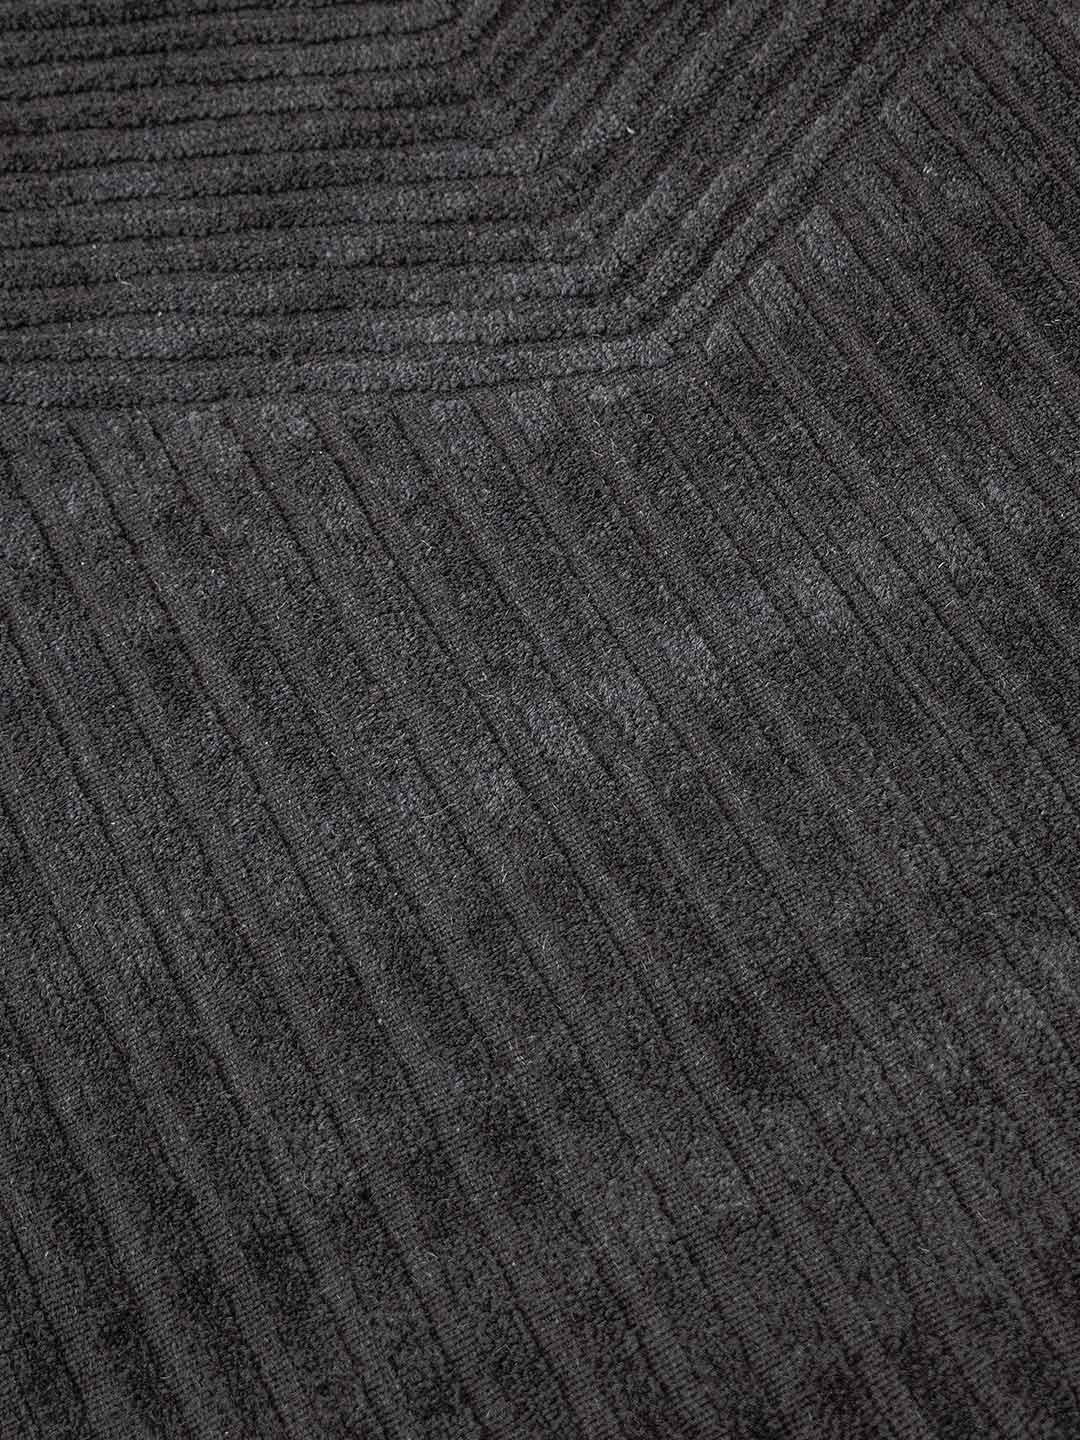 Elm Rug - The Rug Collection